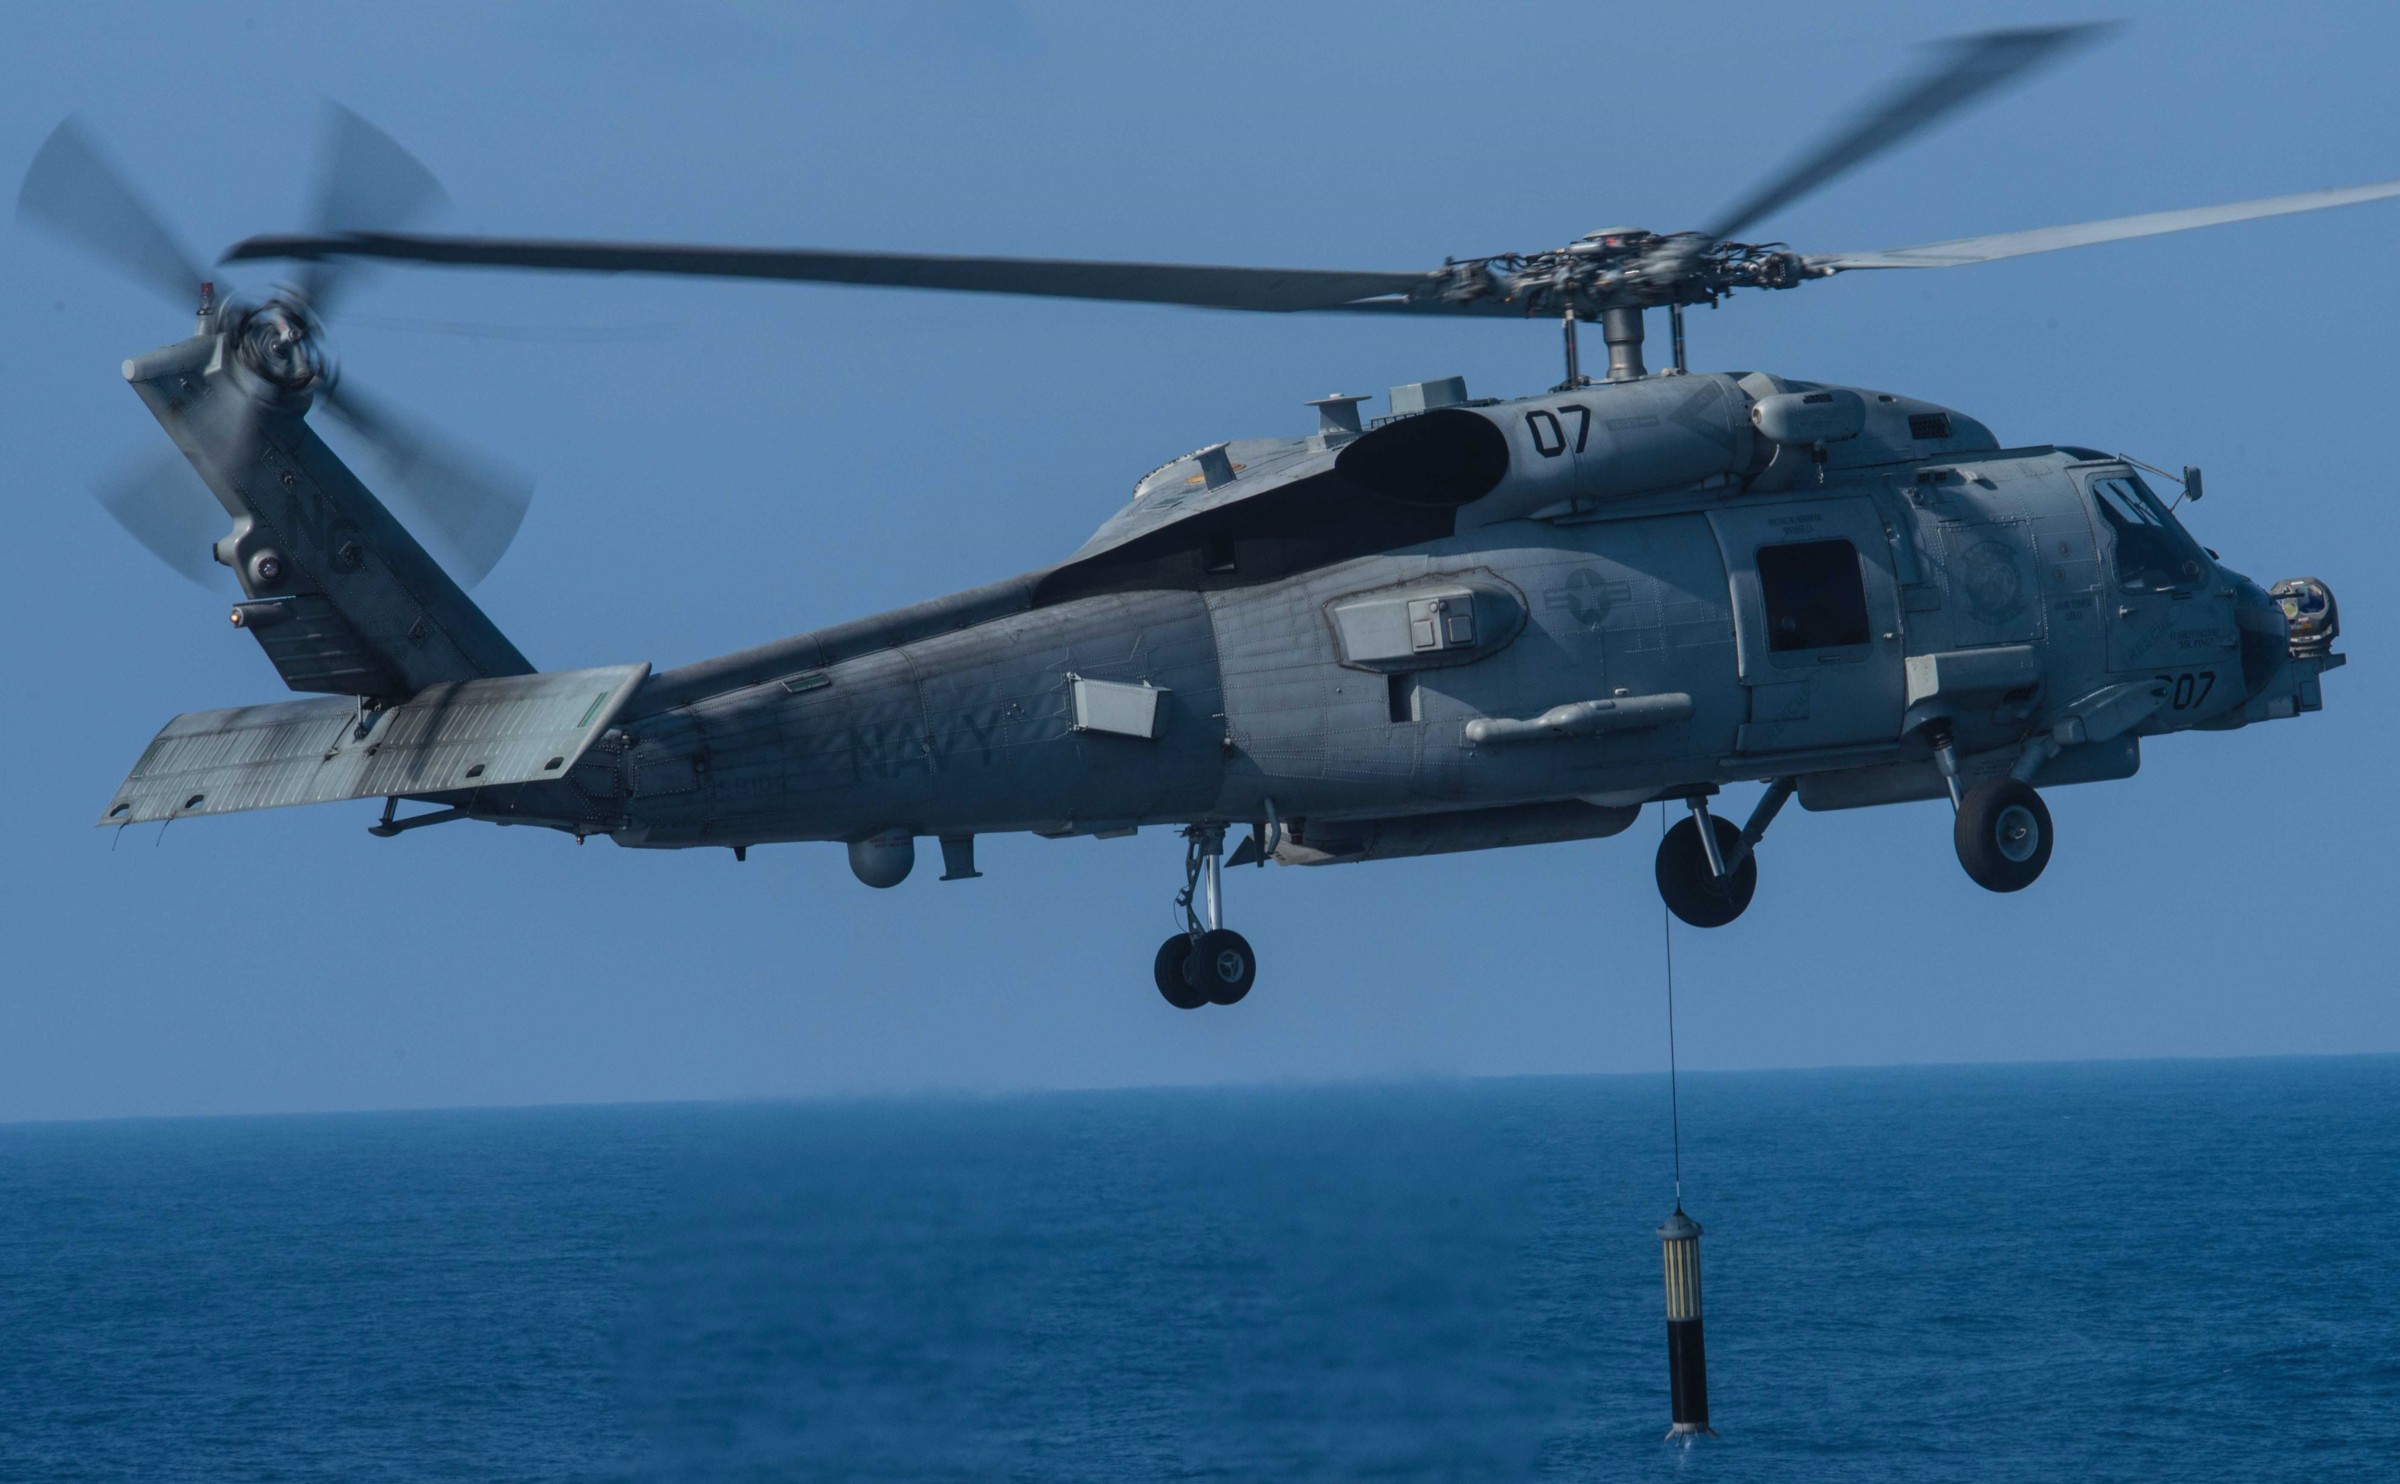 hsm-71 raptors helicopter maritime strike squadron mh-60r seahawk navy 2016 05 dipping sonar